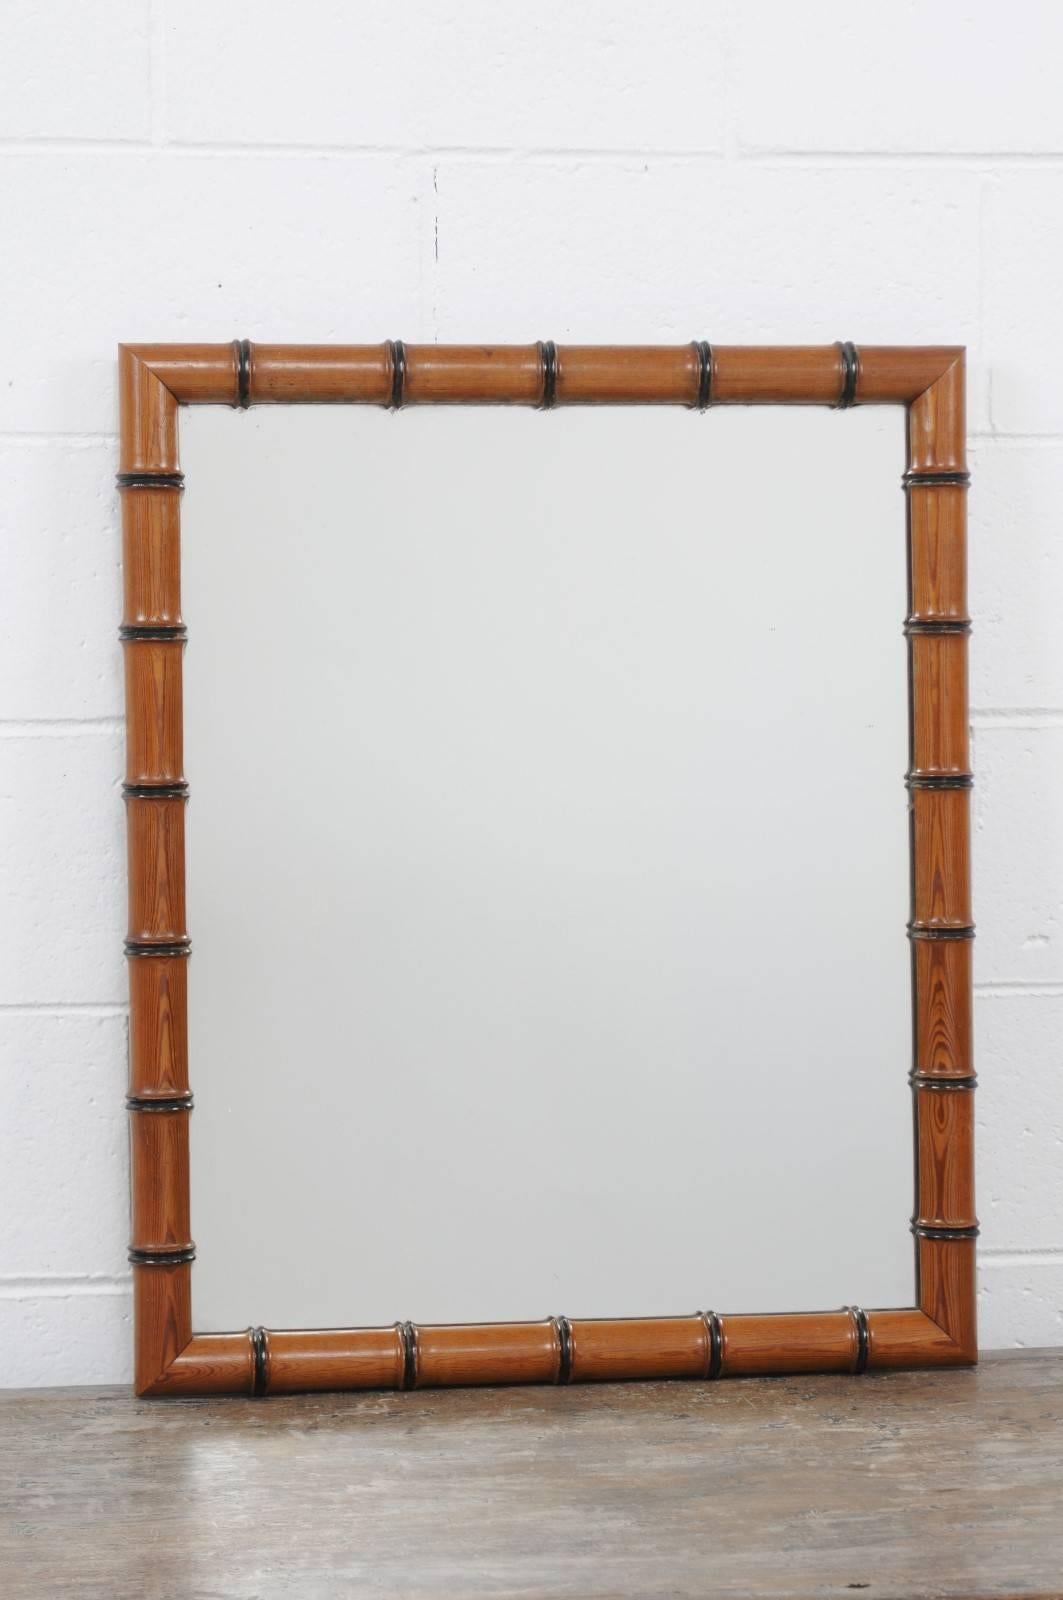 An English faux-bamboo rectangular mirror with ebonized wood accents from the late 19th century. This English mirror features a rustic faux-bamboo frame, rhythmically accented by dark ebonized wood highlights. The mirror plate is clear, allowing